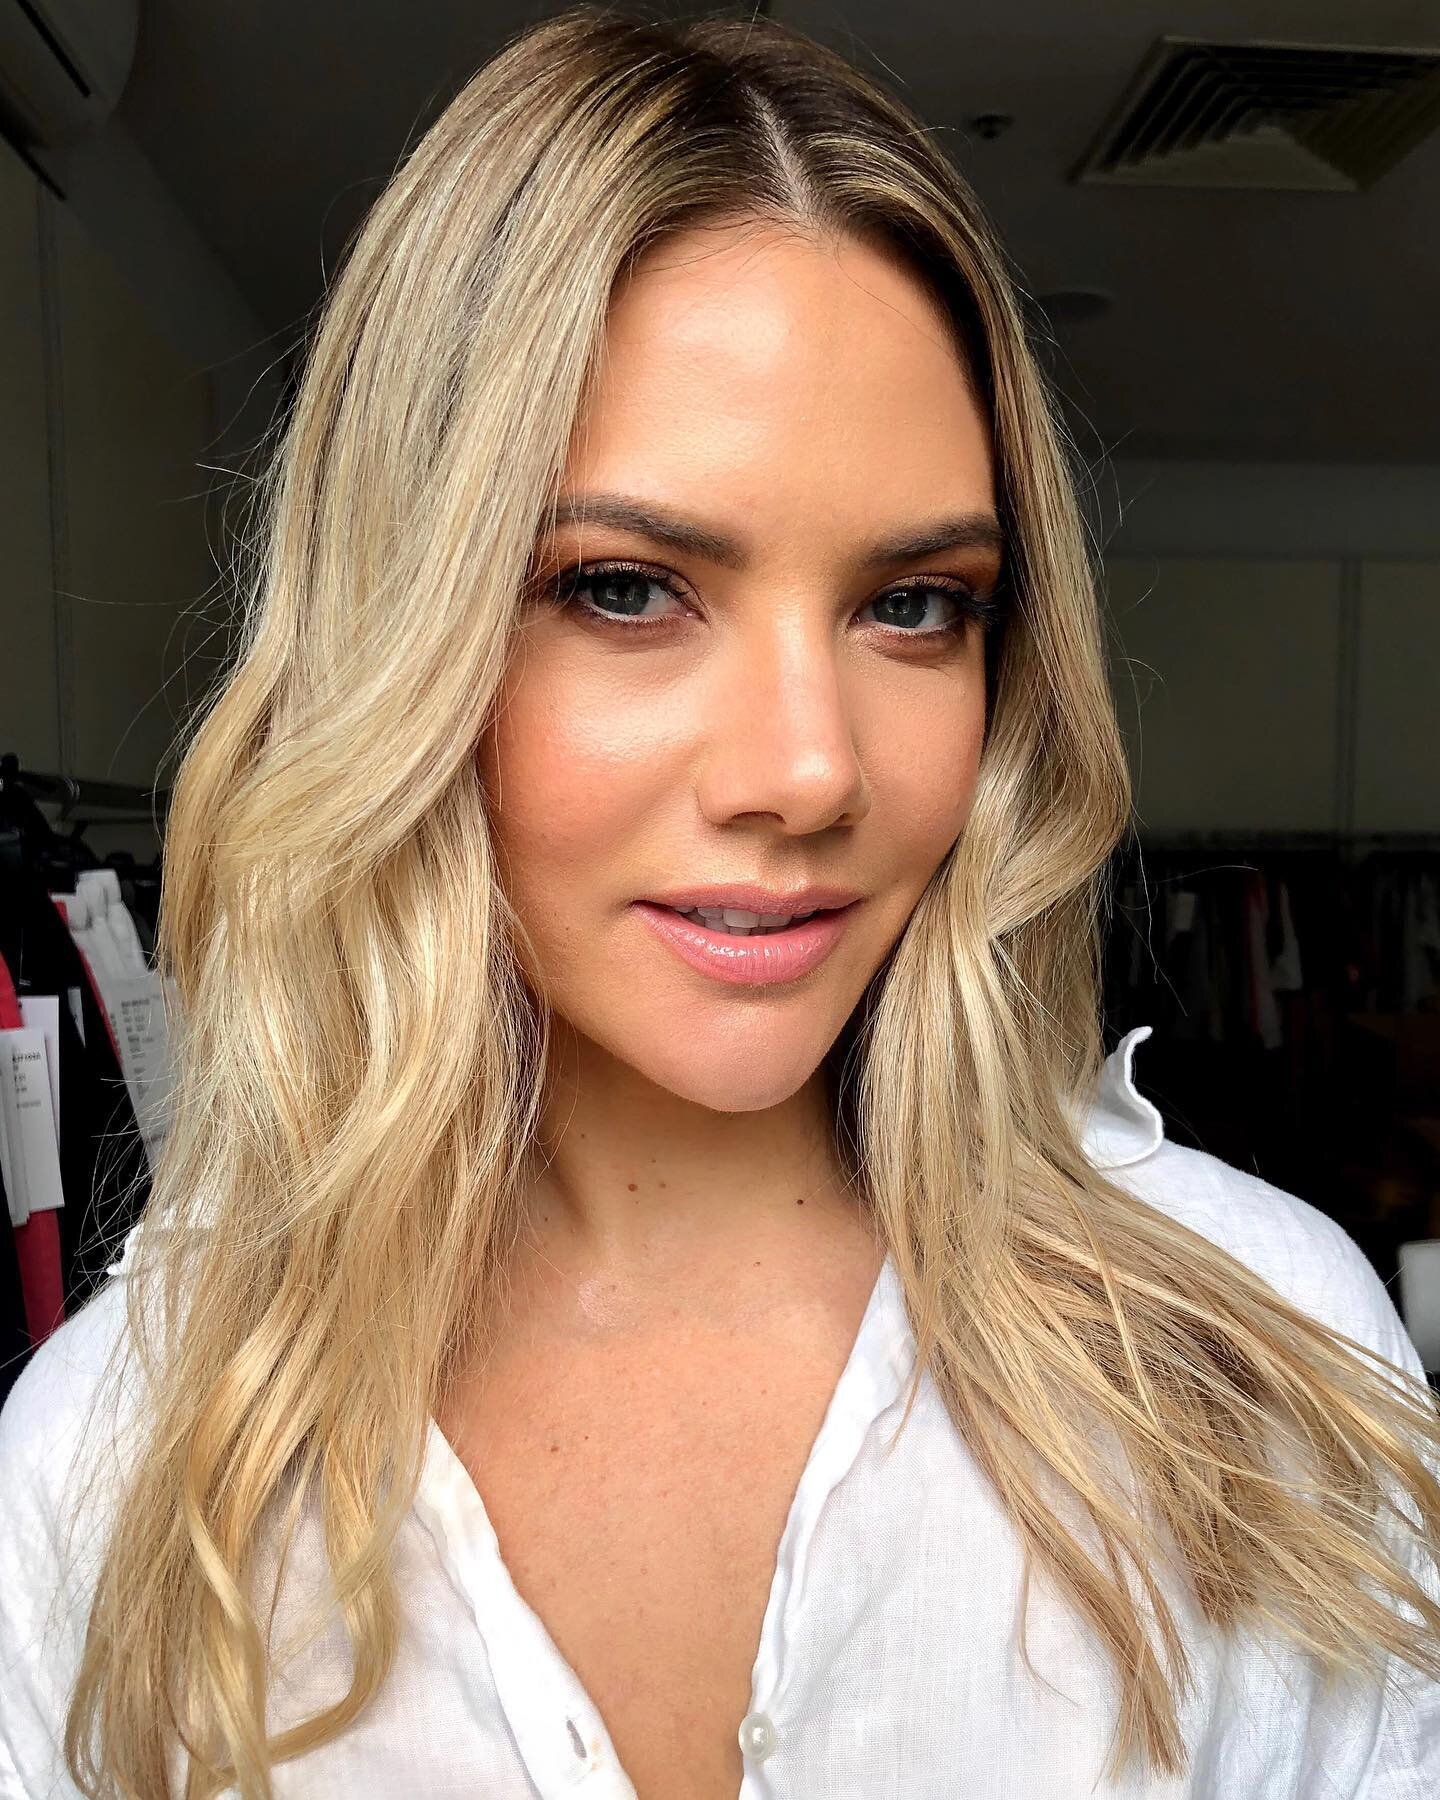 Fresh face for @jumpclothingaus/ #hair #makeup 
Products used: 
Face @tatcha Water Gel moisturizer 
Skin @diormakeup Backstage Foundation 
Lips @meccacosmetica Lip-De Luscious in Nude 
Eyes @urbandecaycosmetics Heat Palette 
Lashes @ardelllashesaus i